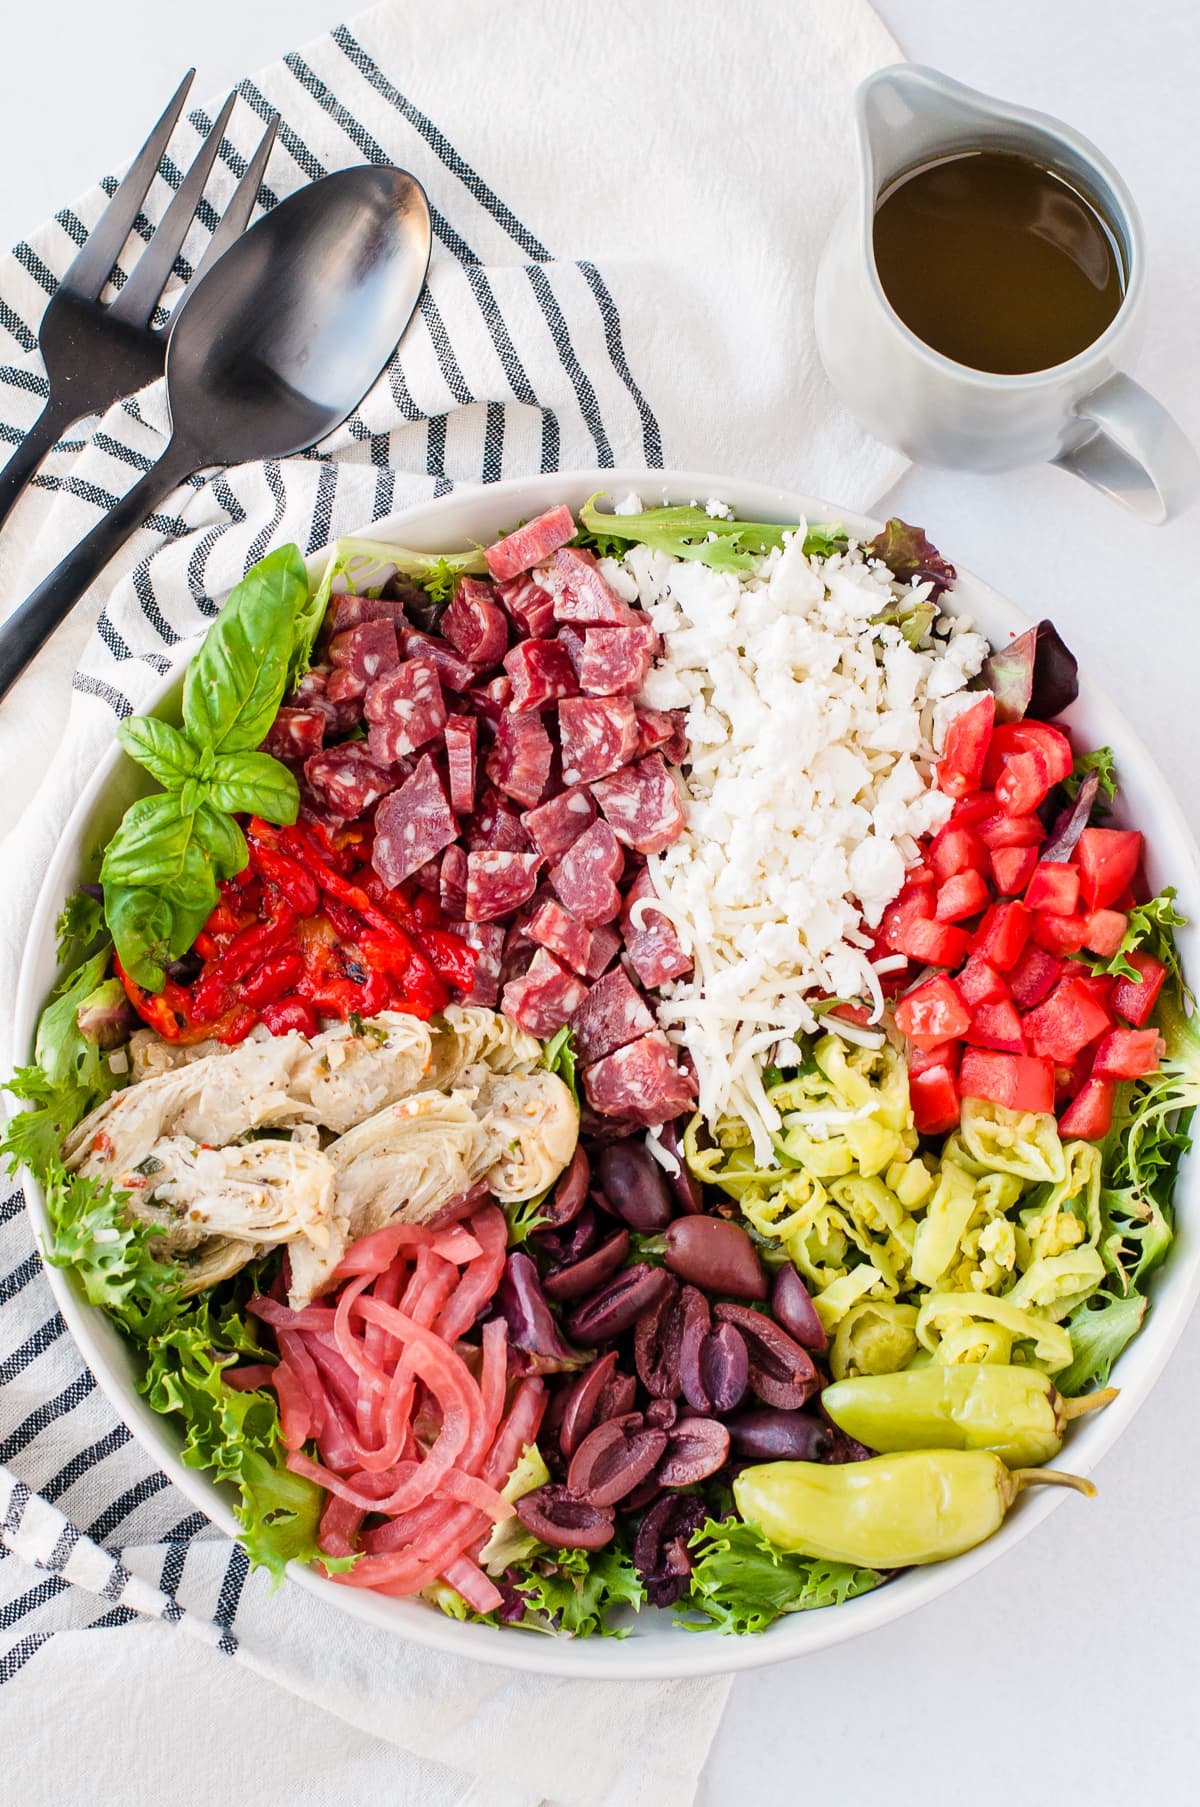 Overhead shot of a brightly colored antipasto salad - topped with meats, cheese, and vegetables